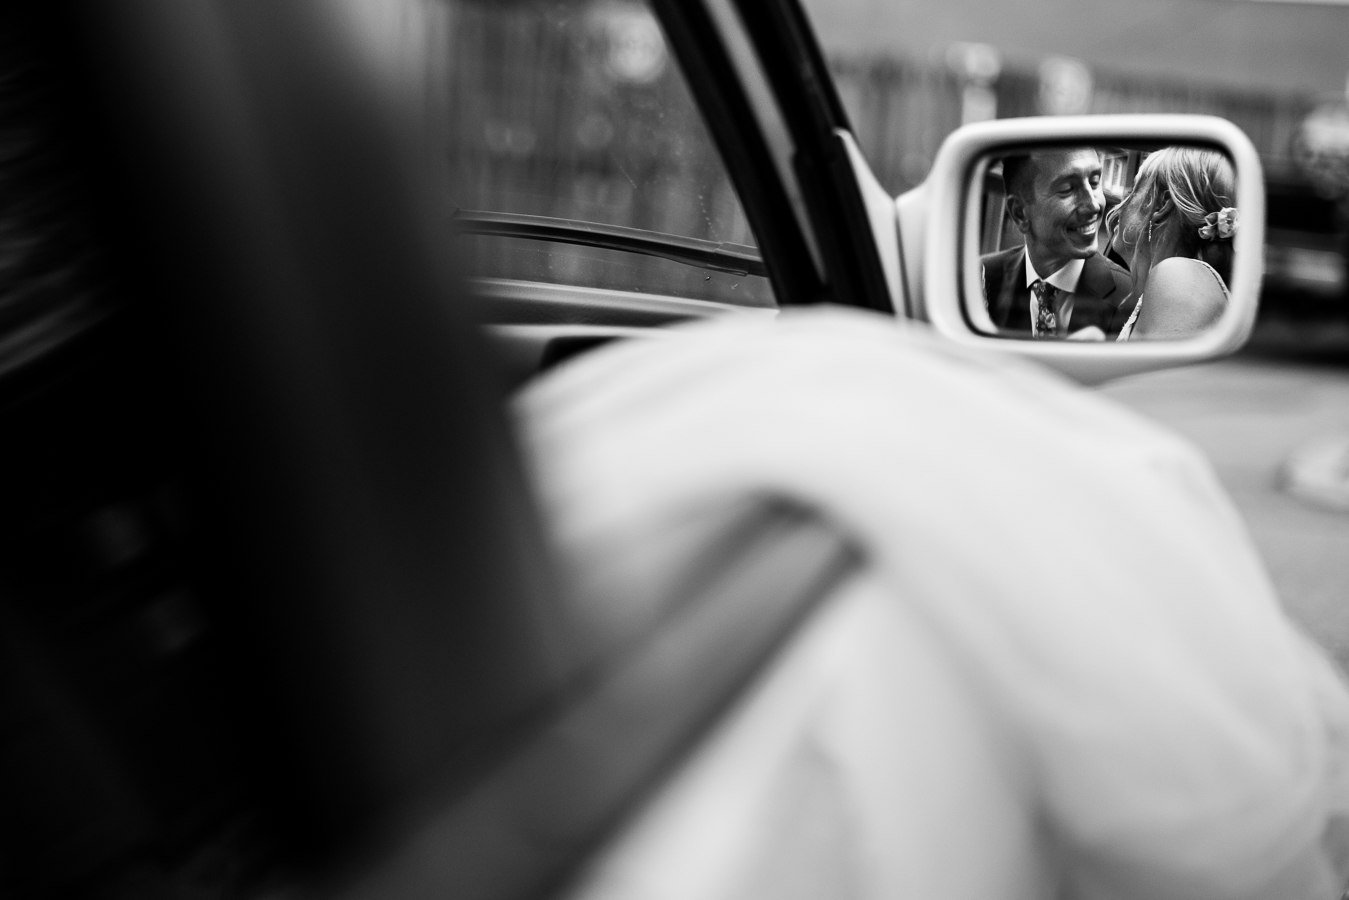 creative wedding photographer, lisa rhinehart, captures this creative, fun black and white image of the bride and groom leaning in to kiss one another captured through the mirror of the car they are leaving in after their wedding ceremony 